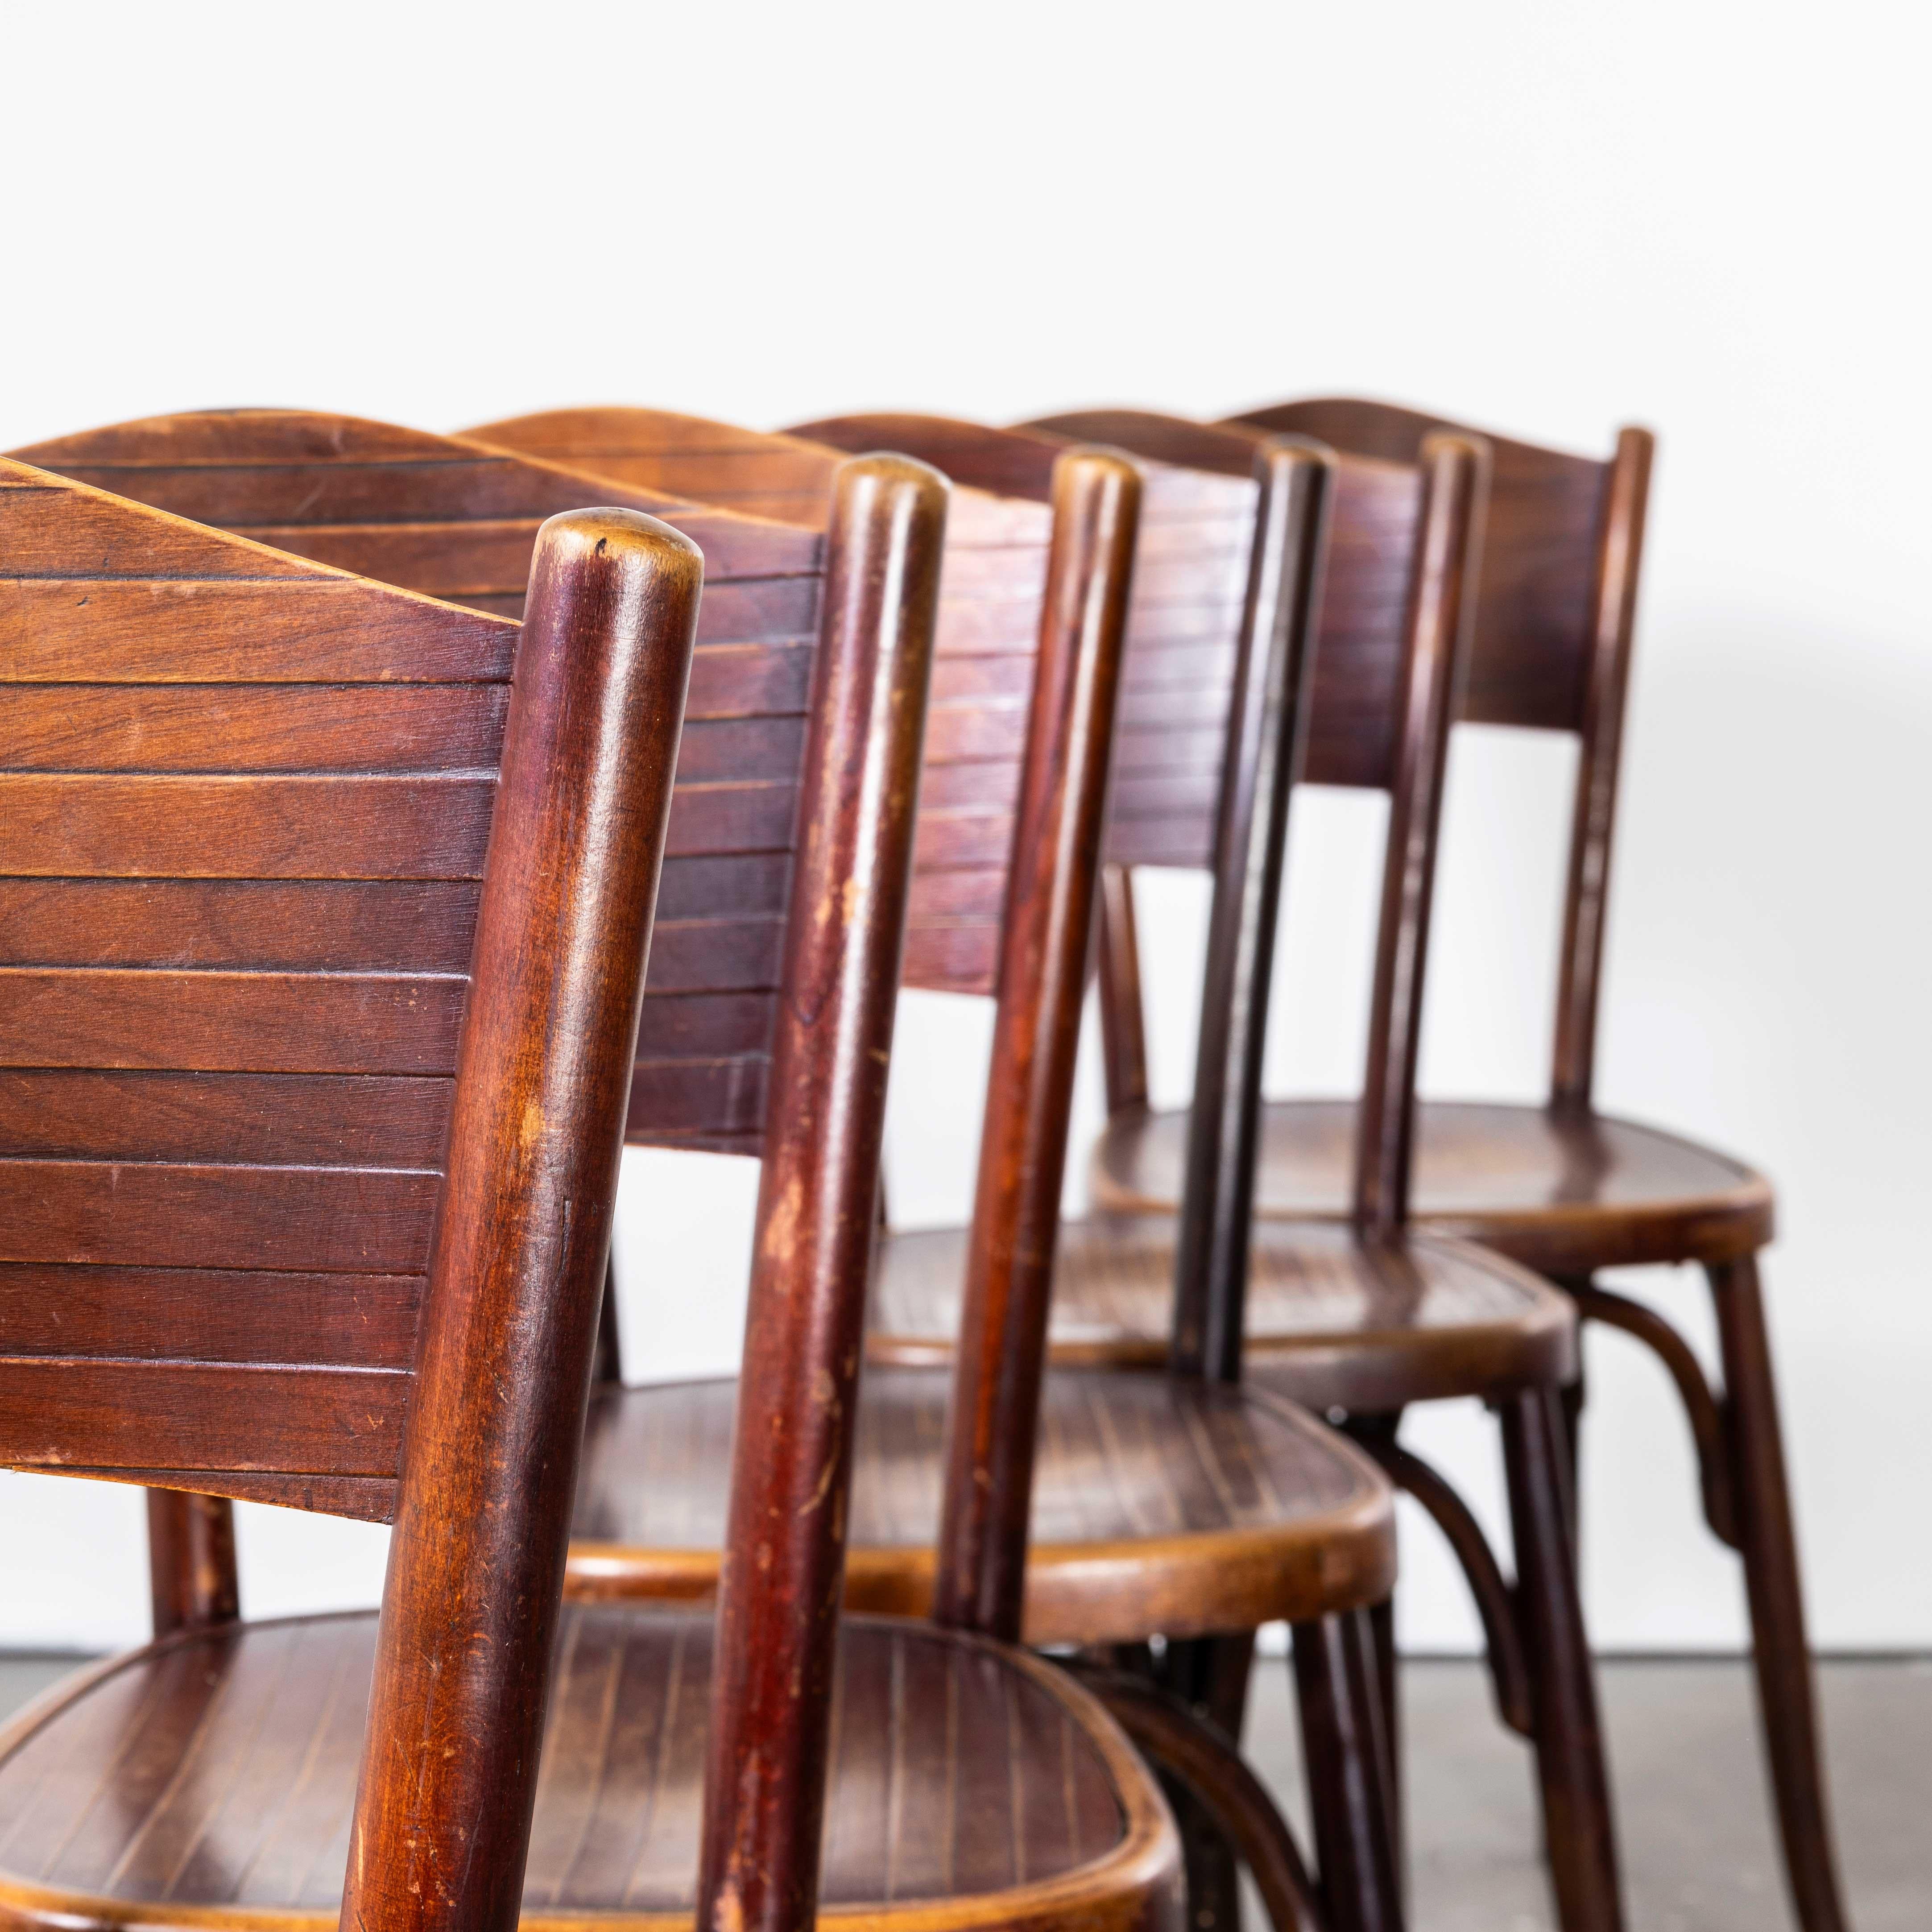 1940’s Fischel Stamped Bentwood Dining Chairs – Good Quantity Available
1940’s Fischel Stamped Bentwood Dining Chairs – Good Quantity Available. The process of steam bending beech to create elegant chairs was discovered and developed by Thonet, but